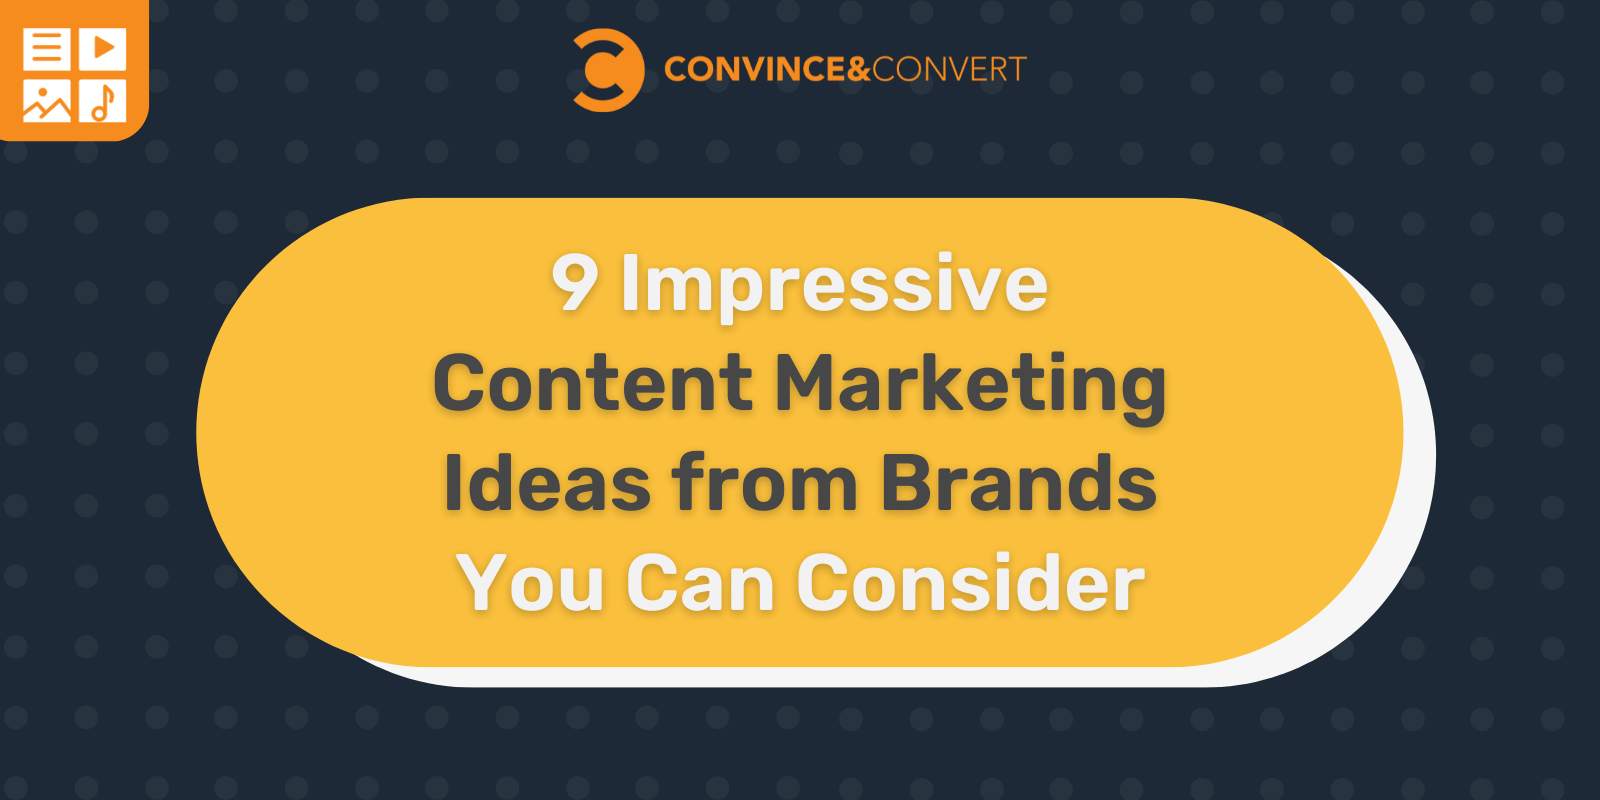 9 Impressive Content Marketing Ideas from Brands You Can Consider